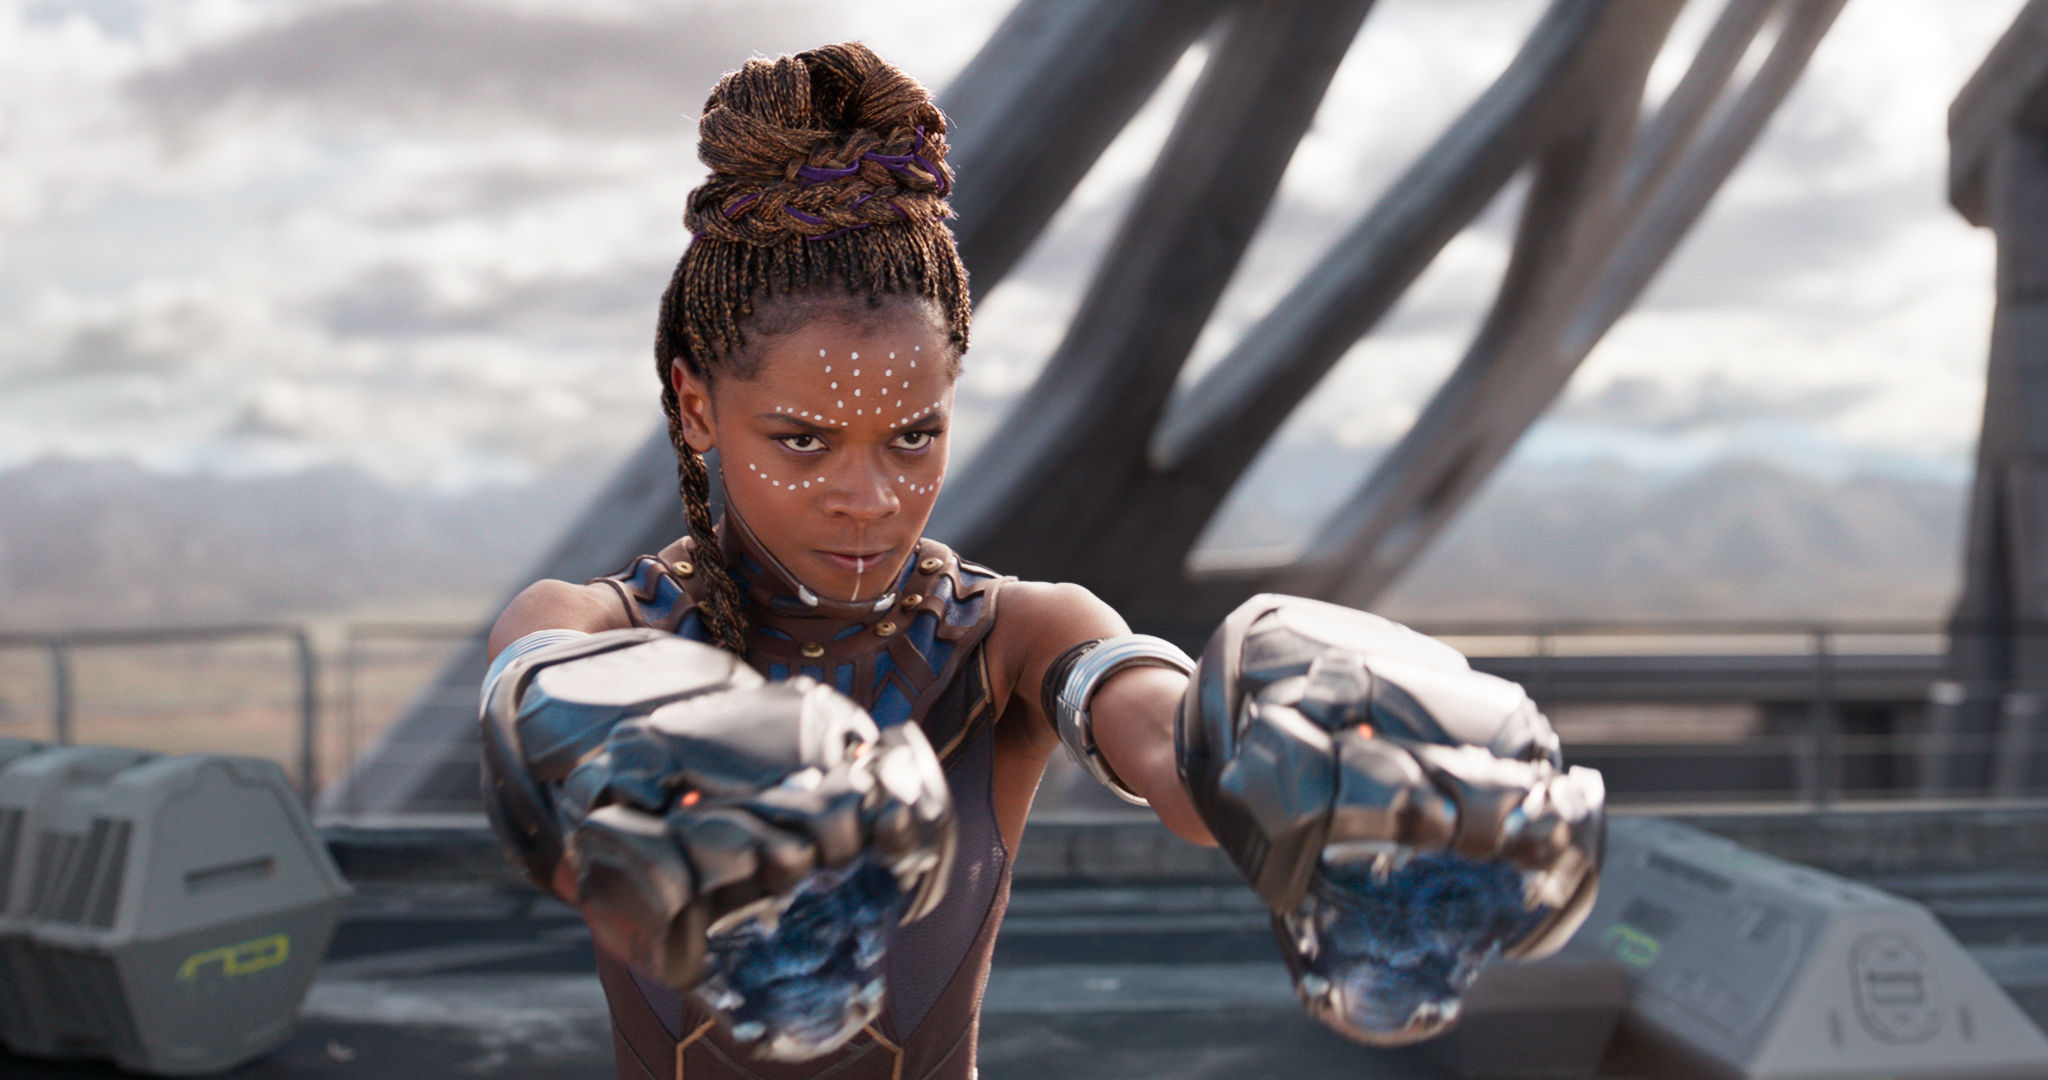 Actor Letitia Wright gets injured while shooting ‘Black Panther 2’, hospitalised